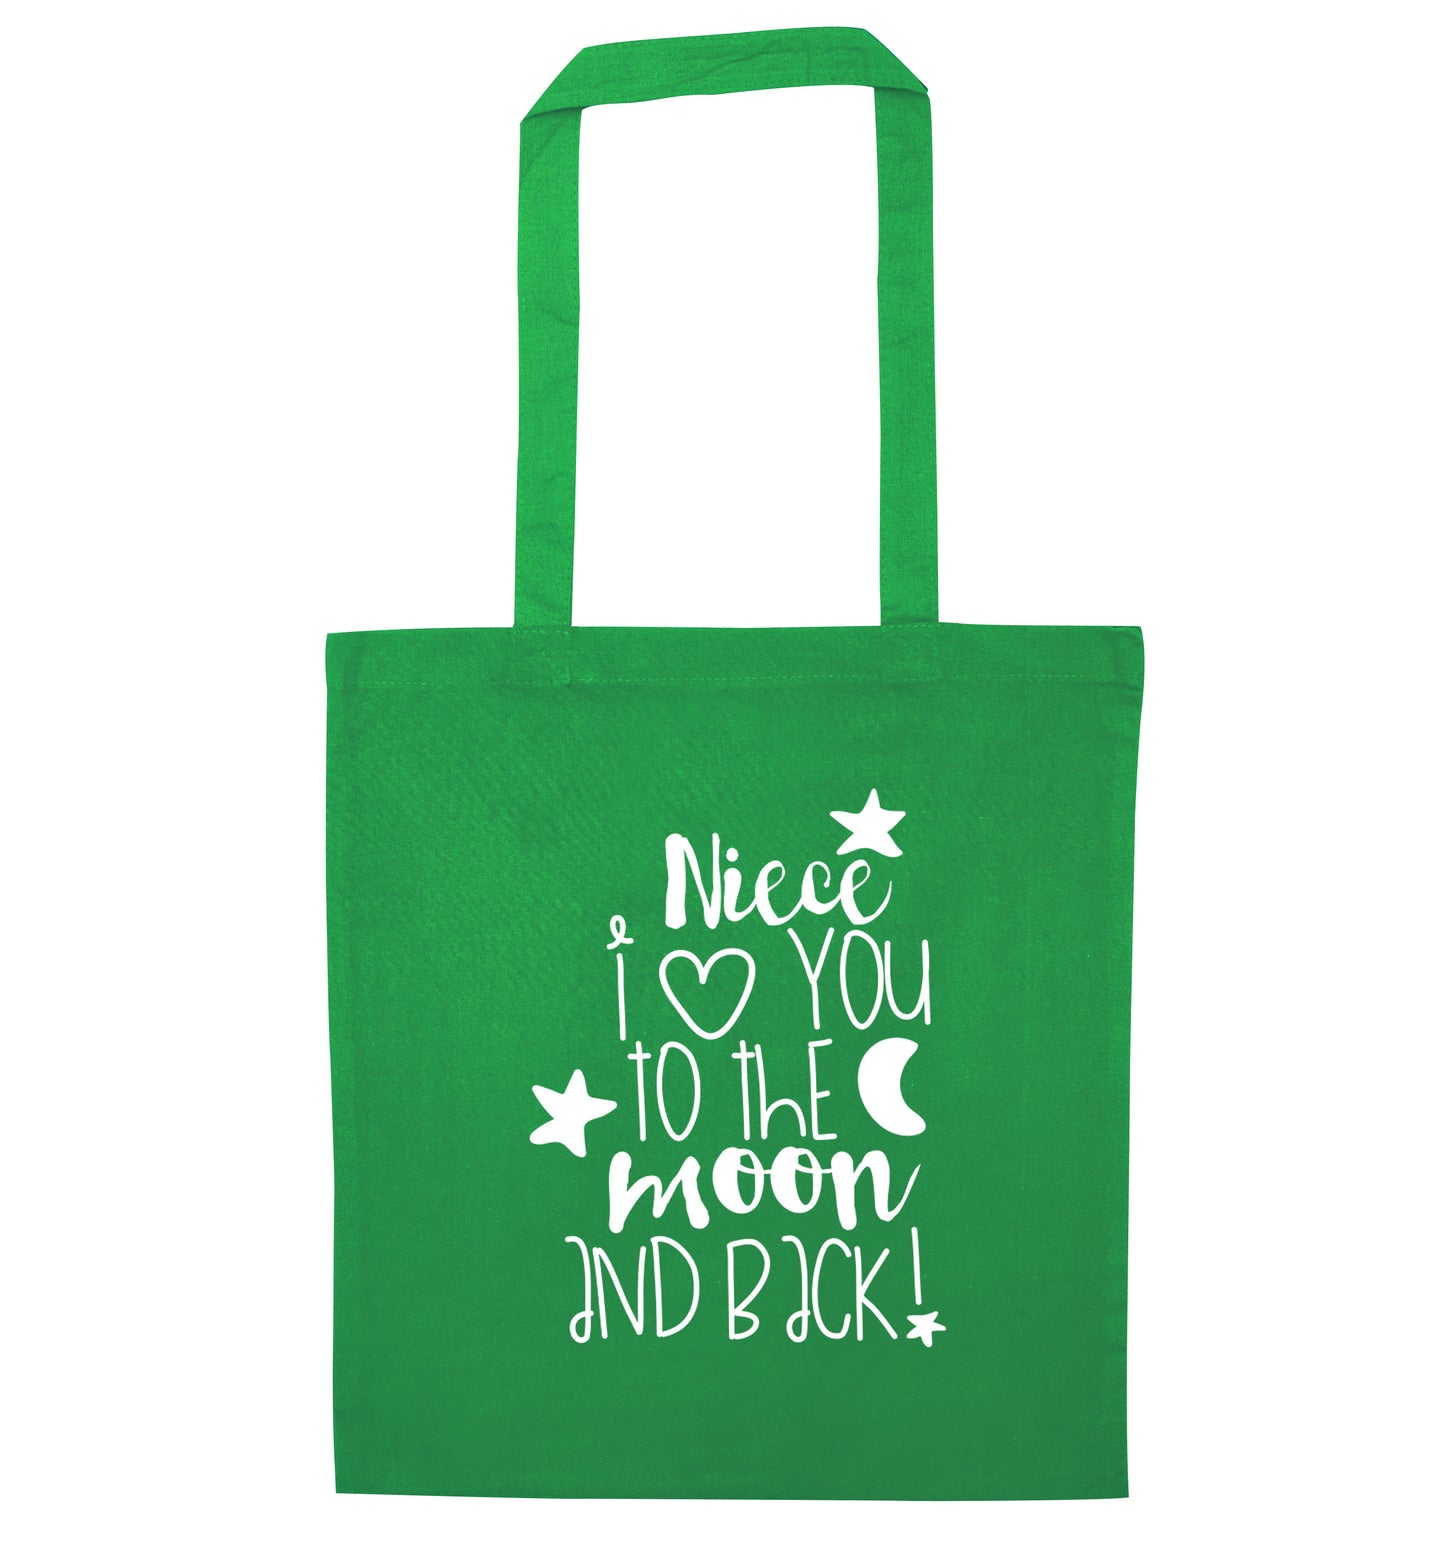 Niece I love you to the moon and back green tote bag